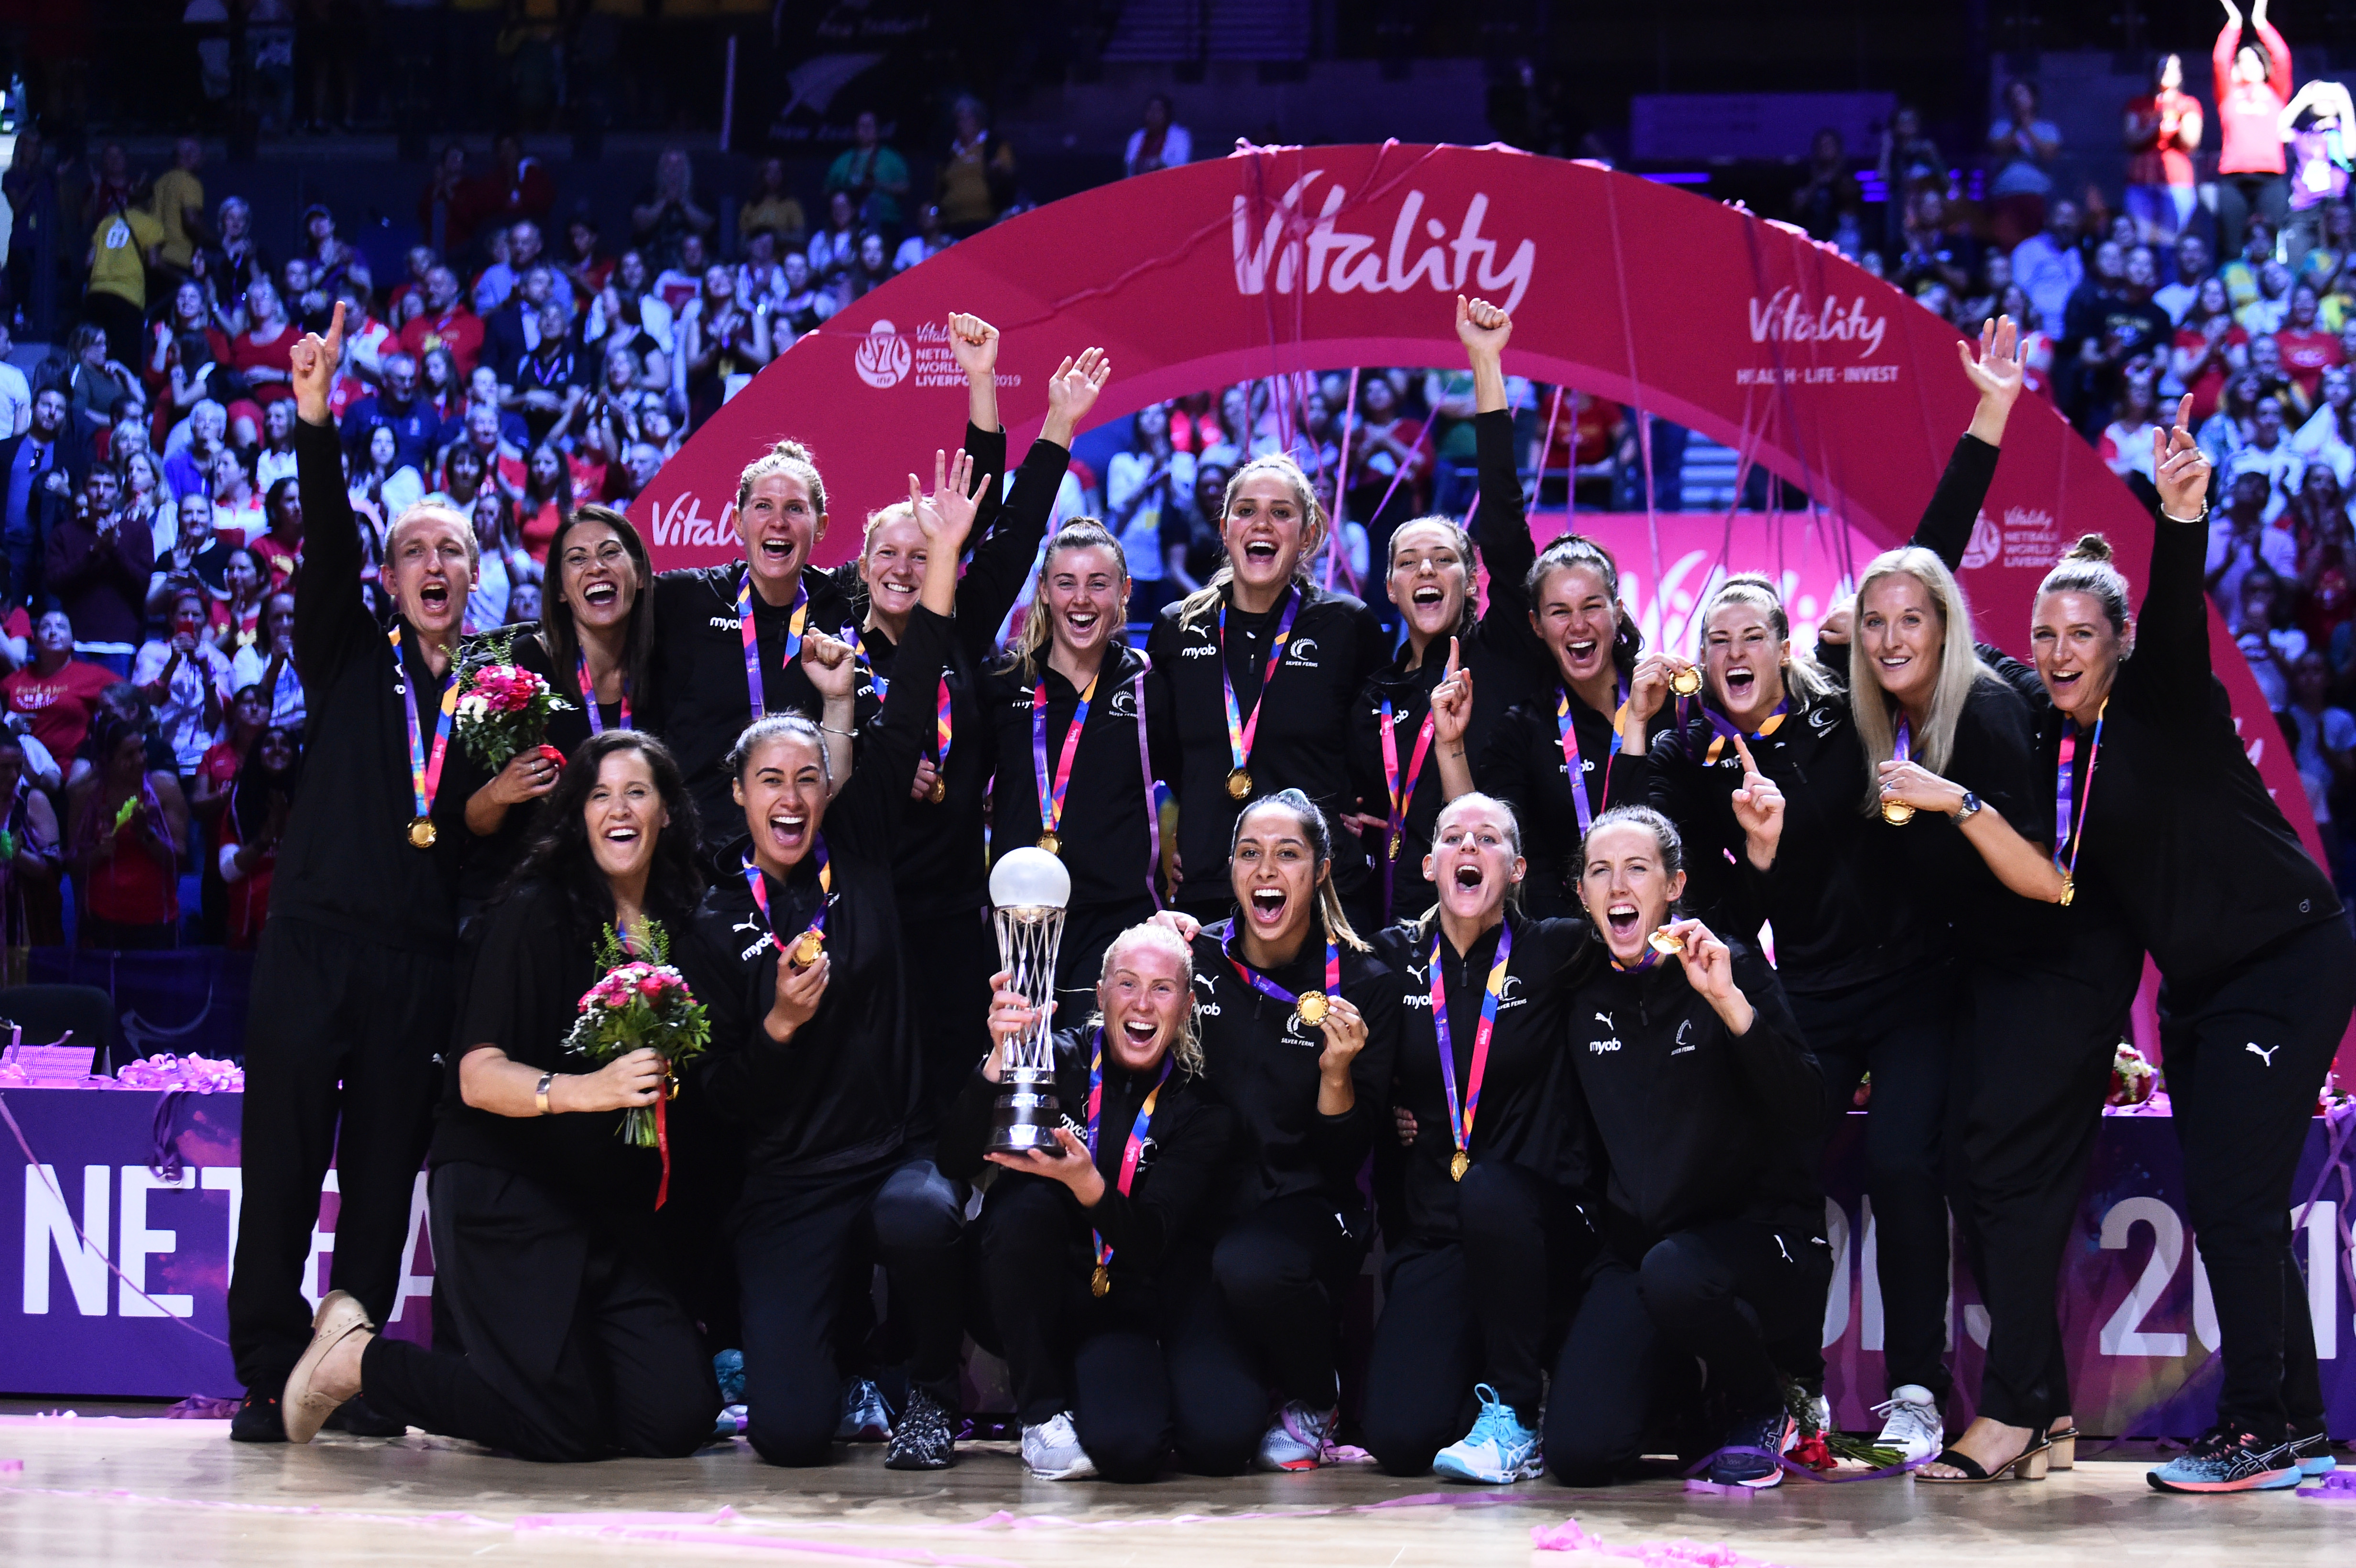 Silver Ferns claim first World Cup in 16-years | New Zealand Olympic Team